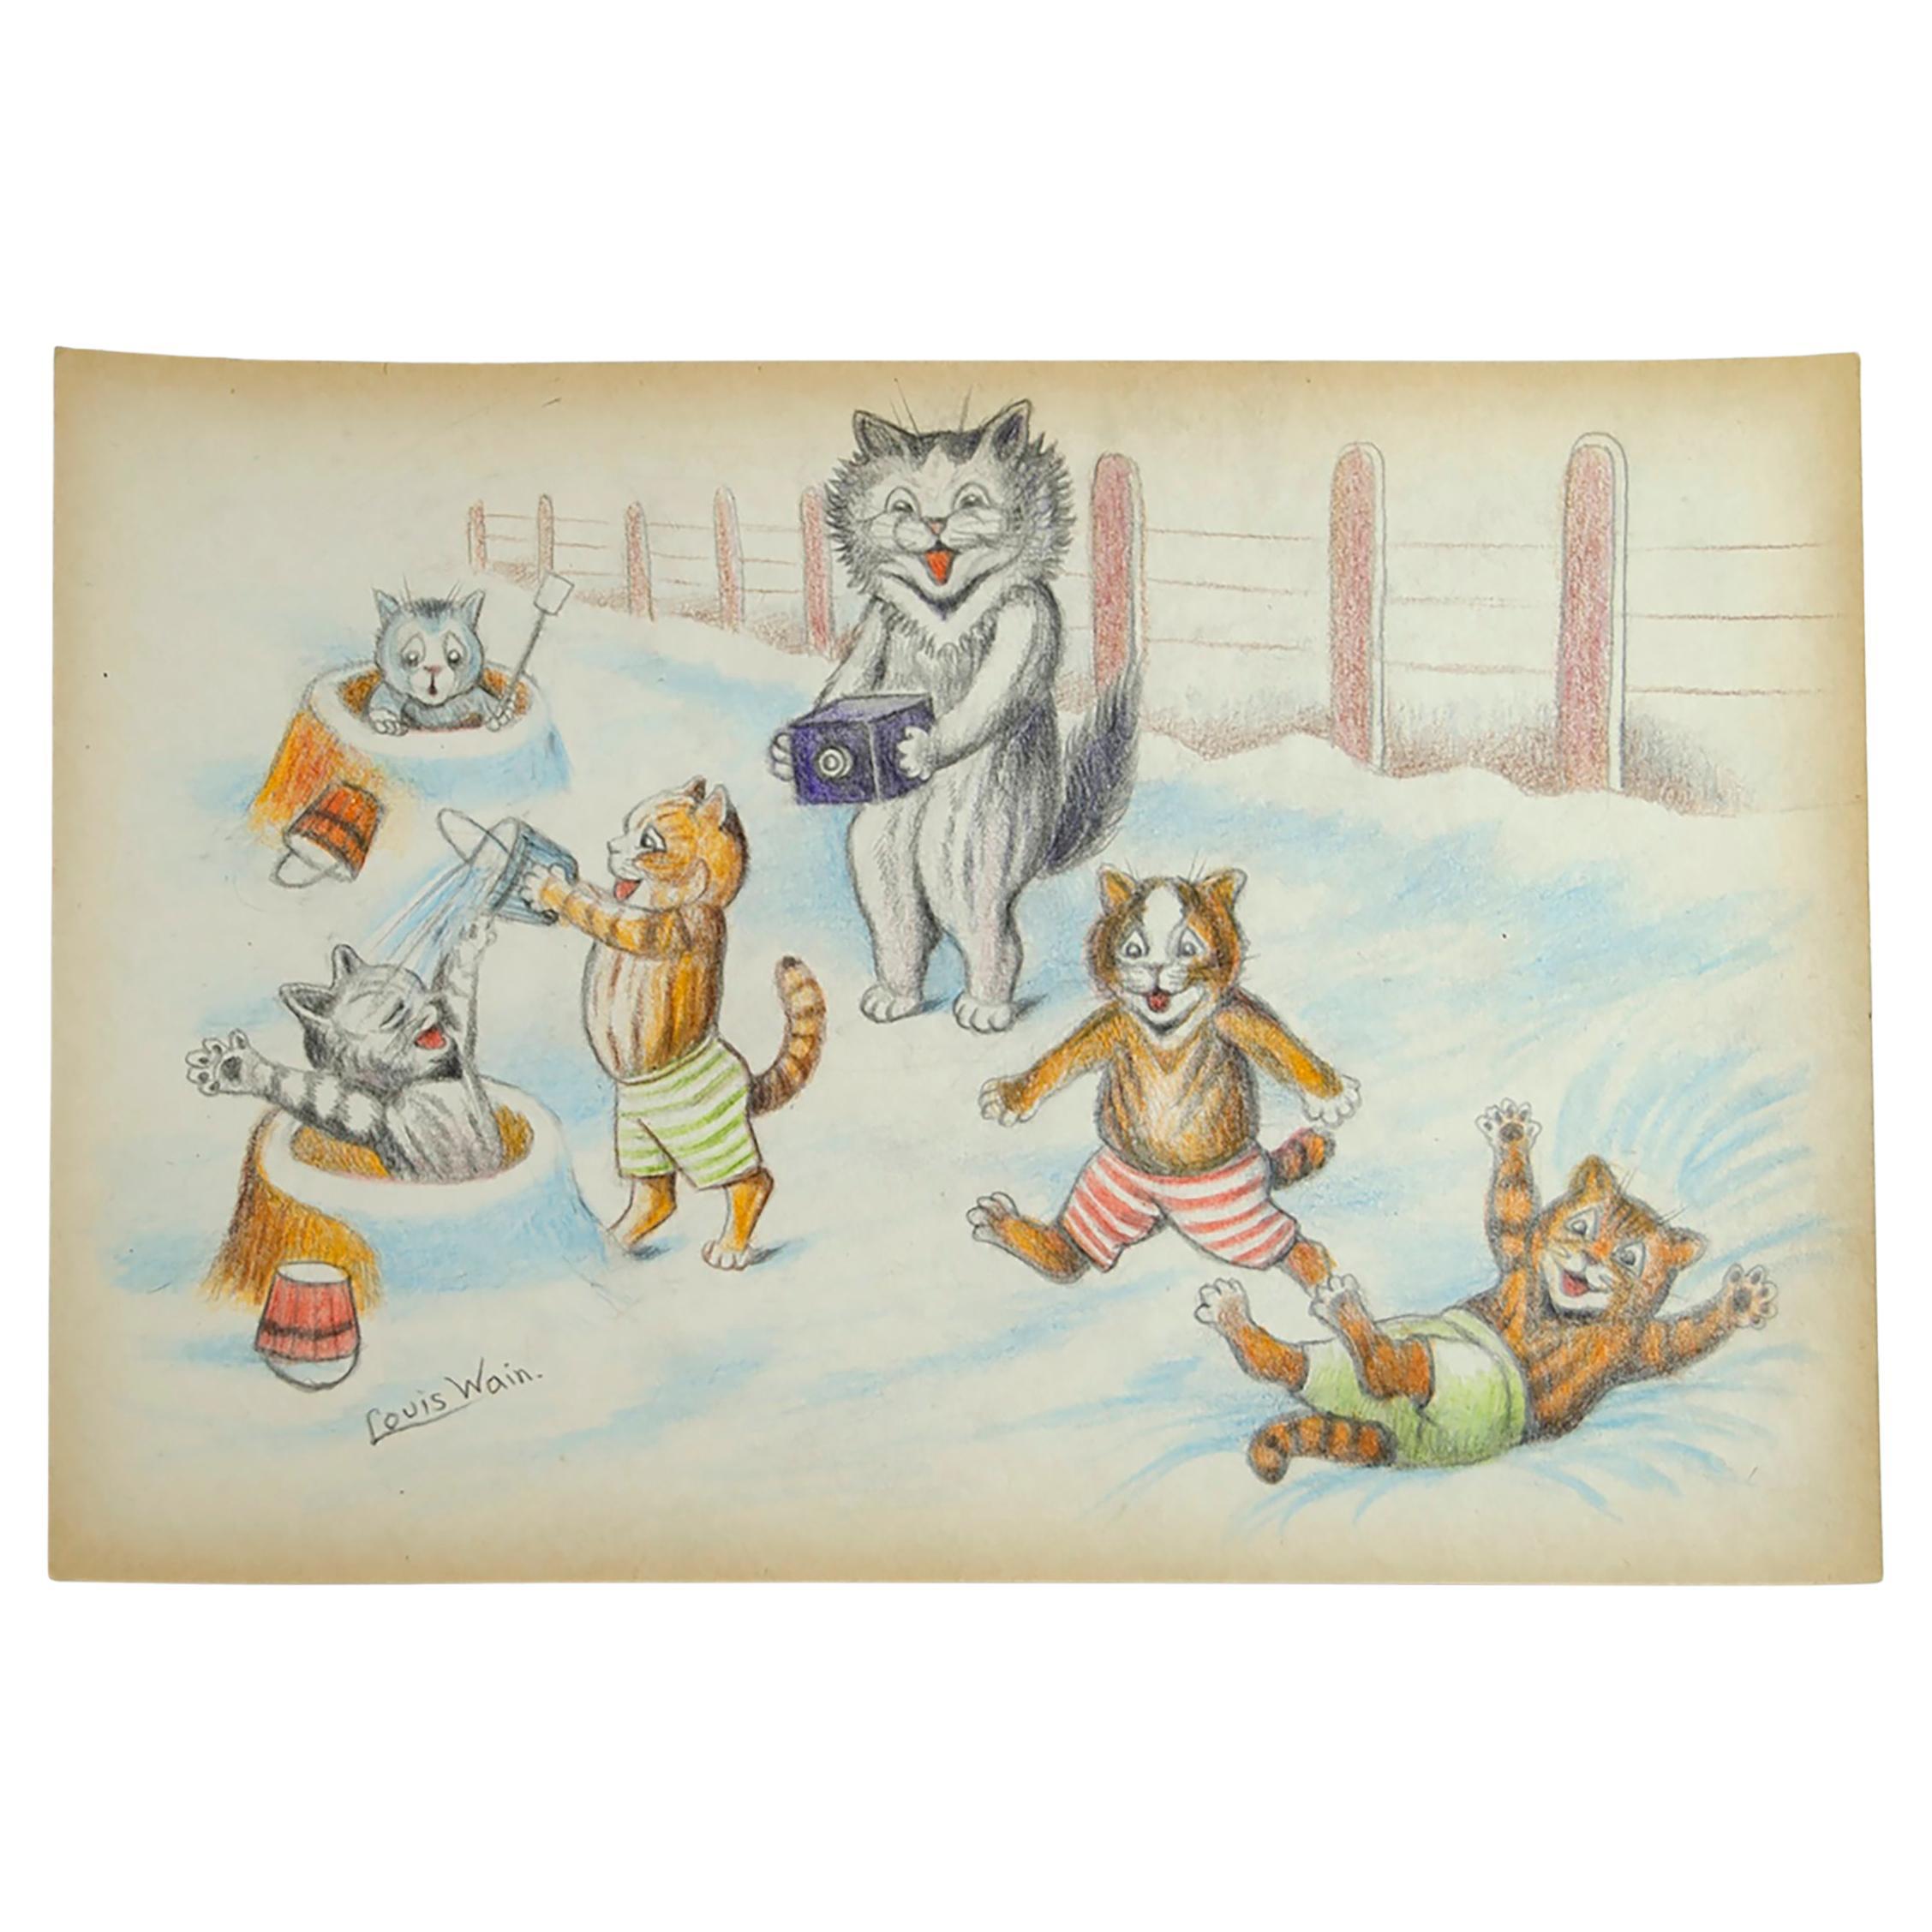 Drawing by Louis Wain "cats playing in the snow"